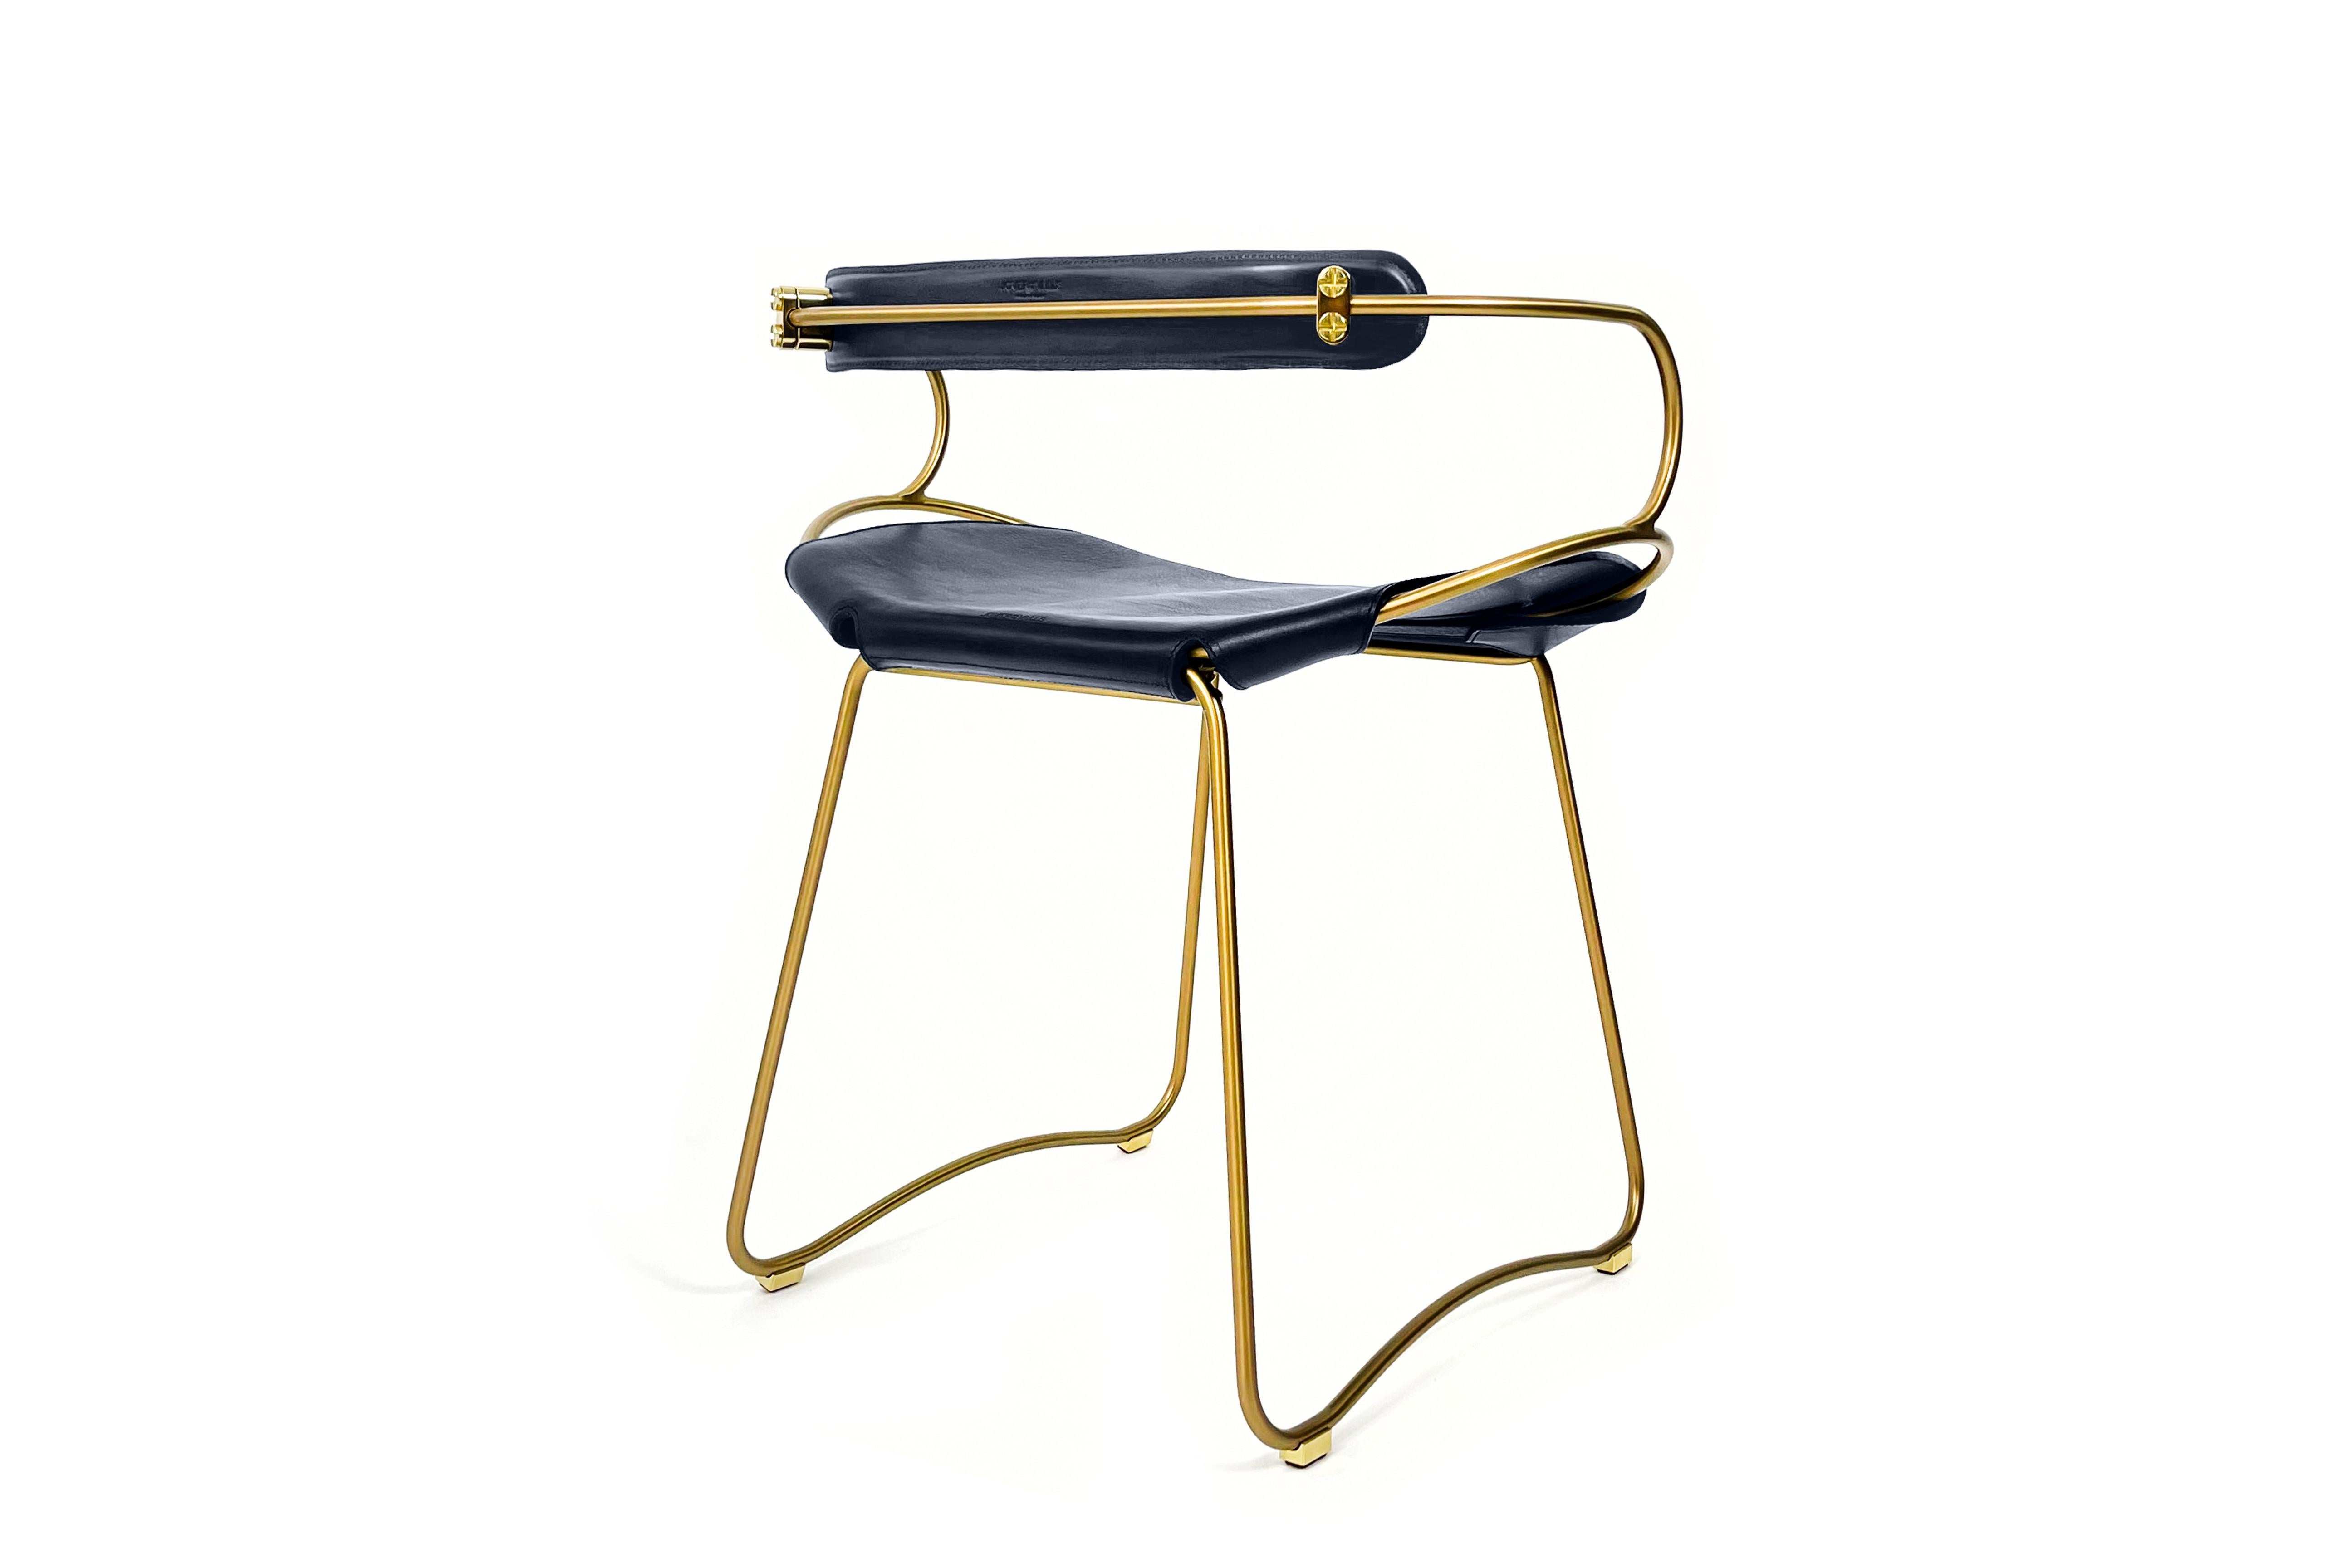 Spanish Contemporary Chair / Table Stool W Backrest Aged Brass Metal & Navy Blue Leather For Sale